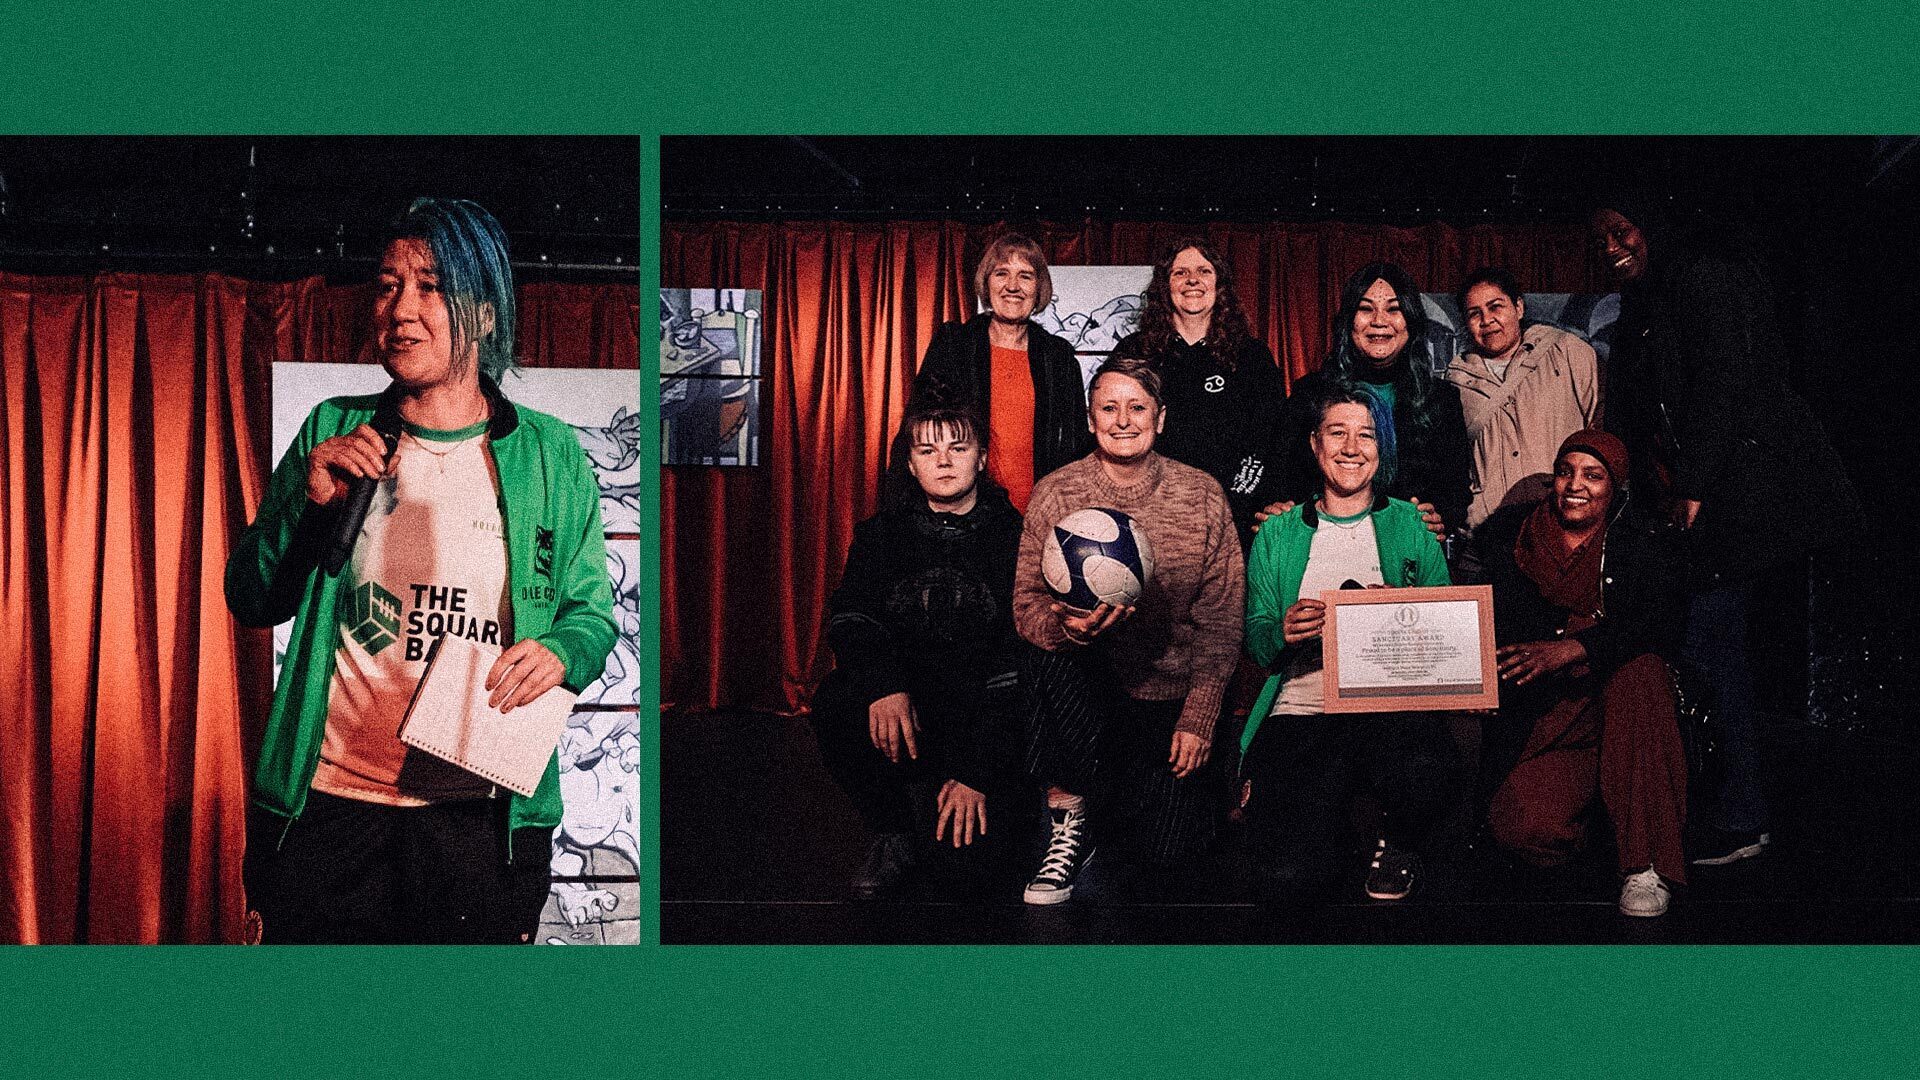 Two photos of the Holbeck Moor Women's team being presented with their Club of Sanctuary award. Coach Claire Blue is wearing their white home shirt, sponsored by The Square Ball